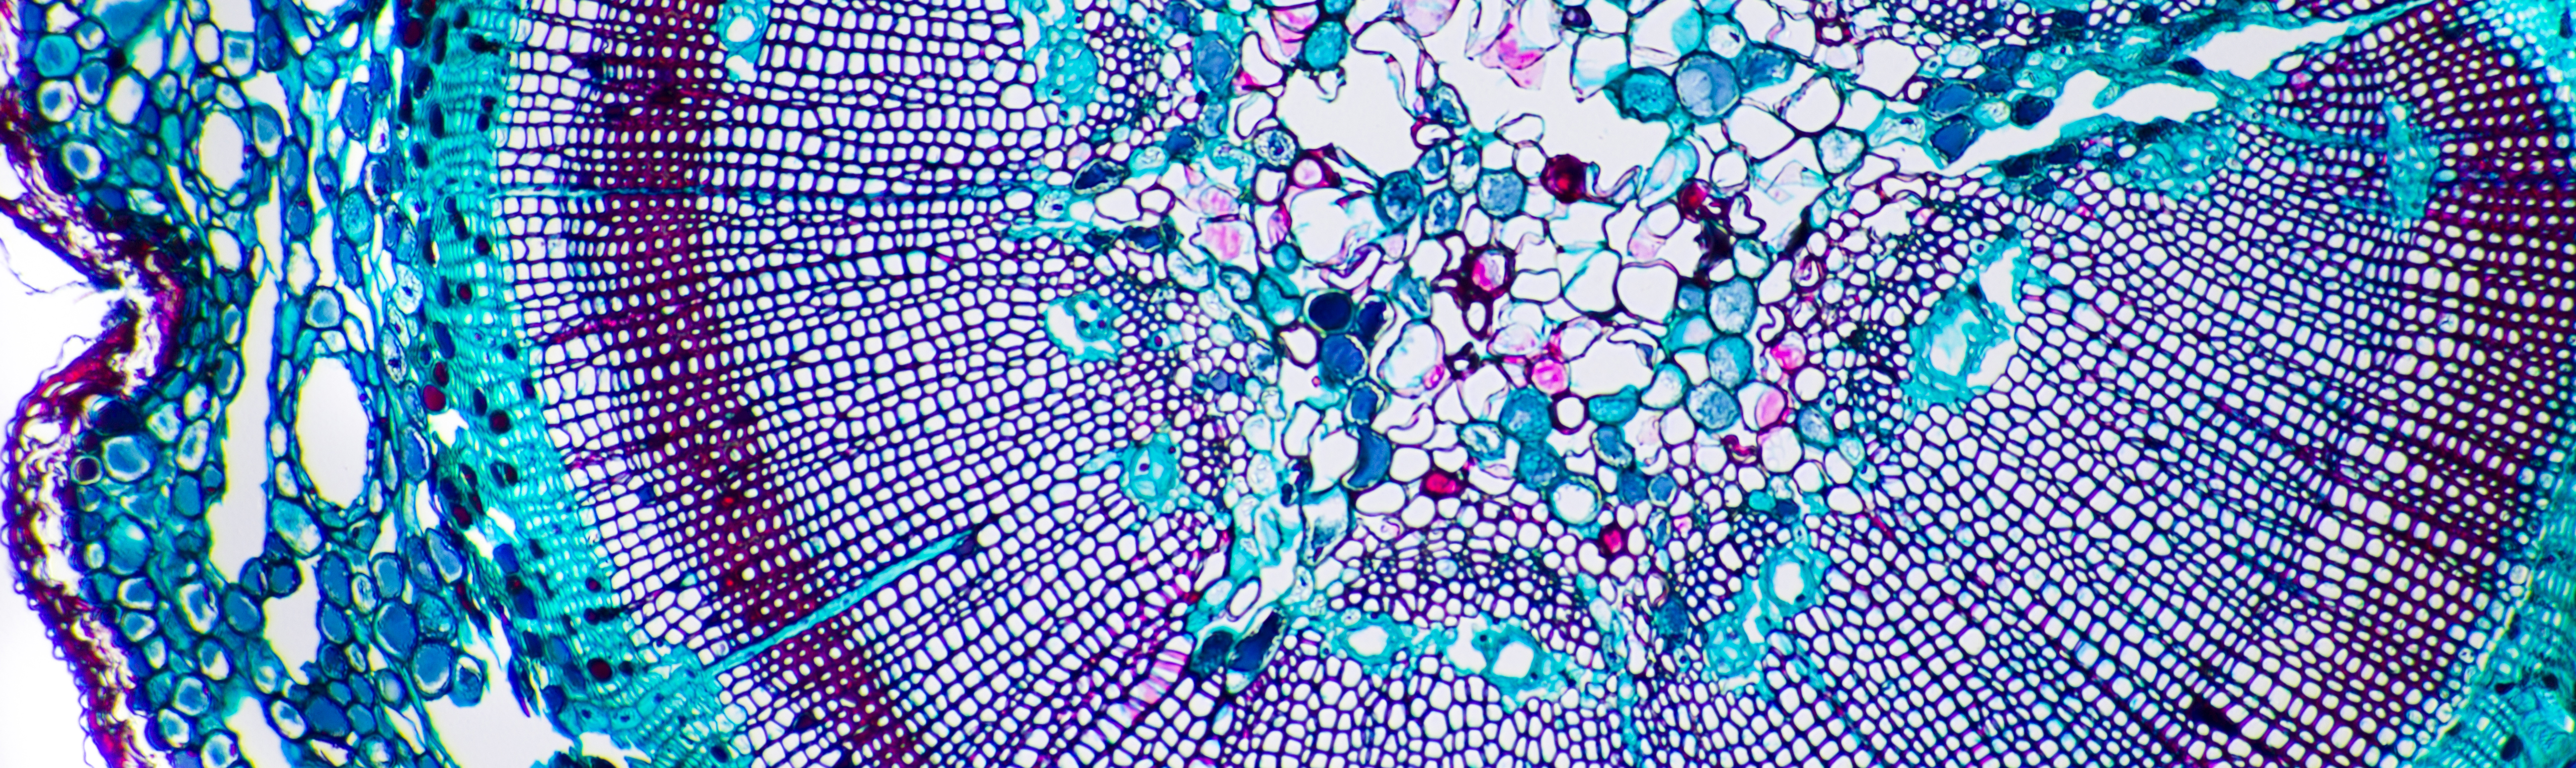 Vegetal tissue micrography of Corn stem dyed blue and purple